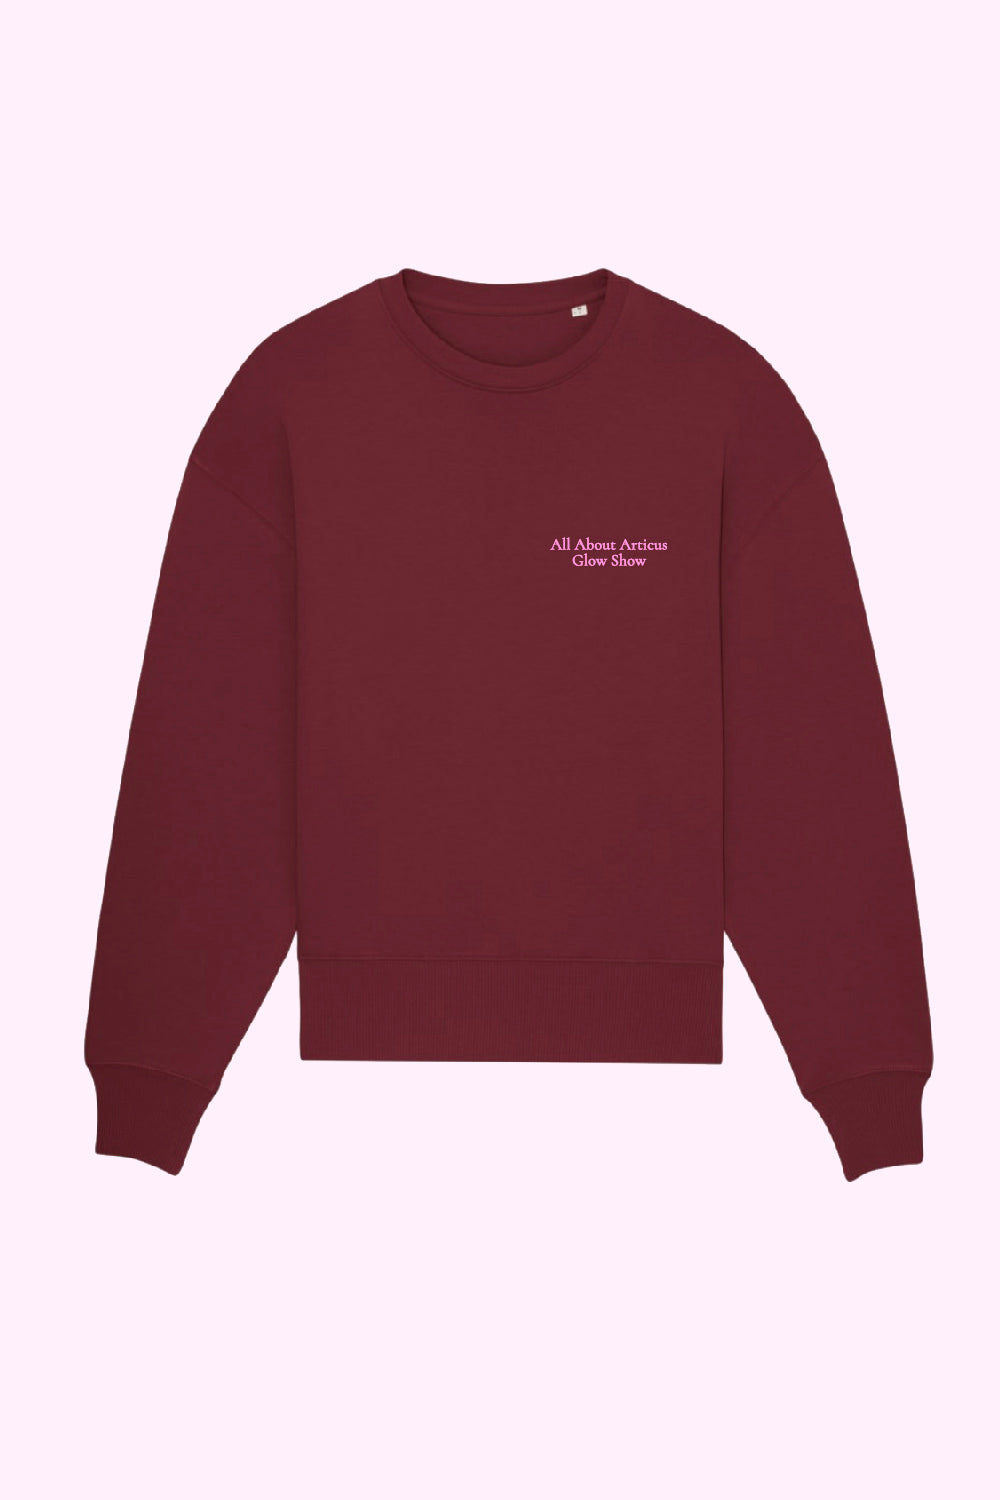 The Glow Show Sweater